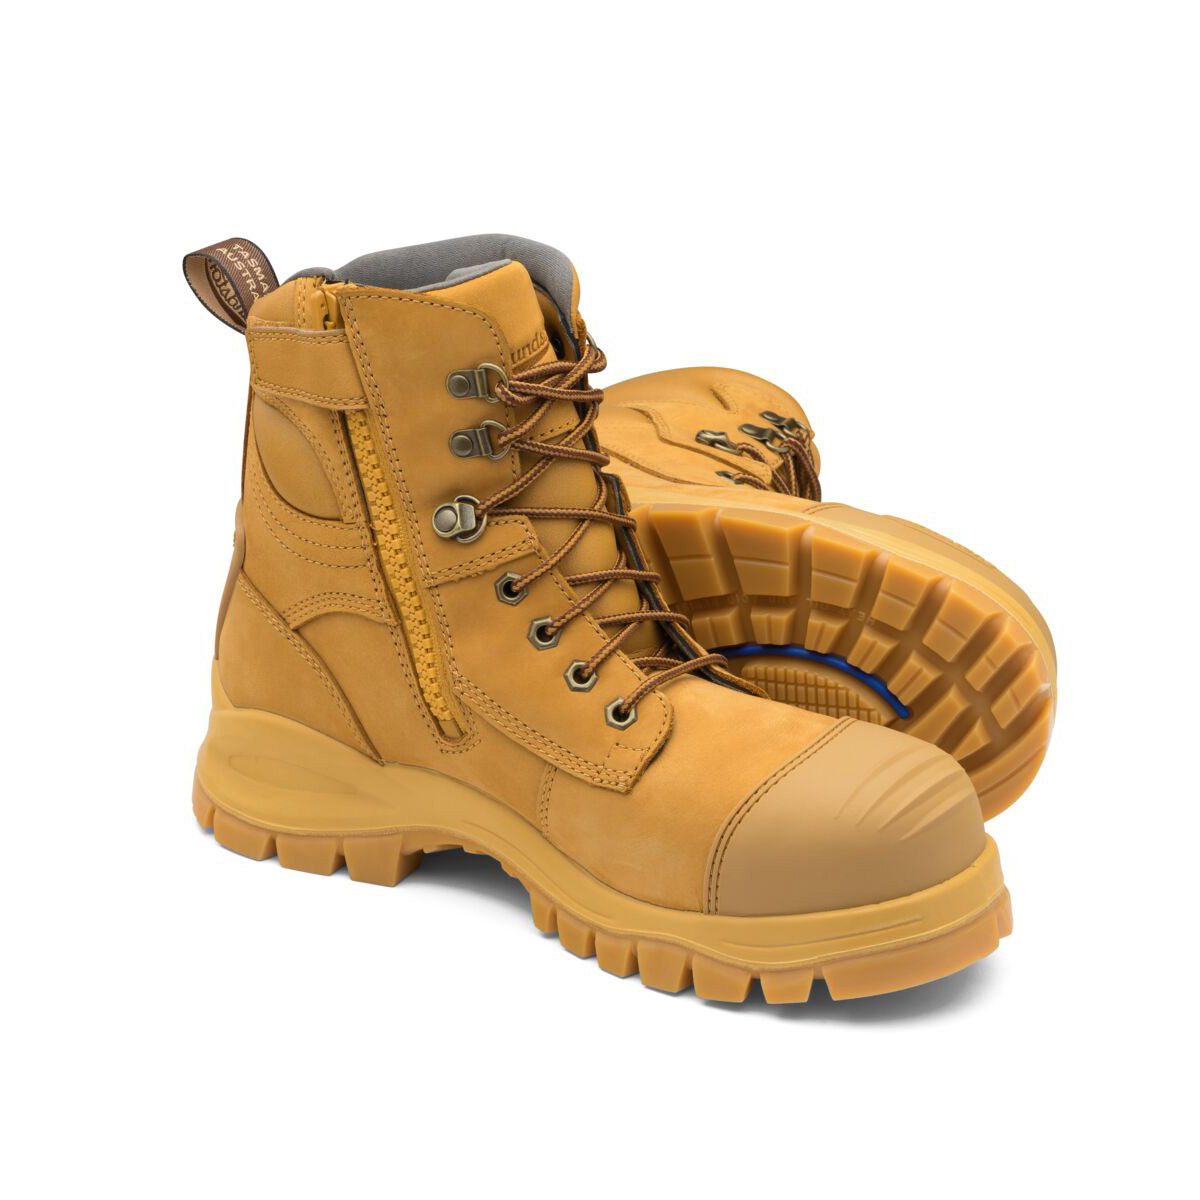 Blundstone Size Men's 5/Women's 7 Yellow #992 Leather Steel Toe Boots With Rubber